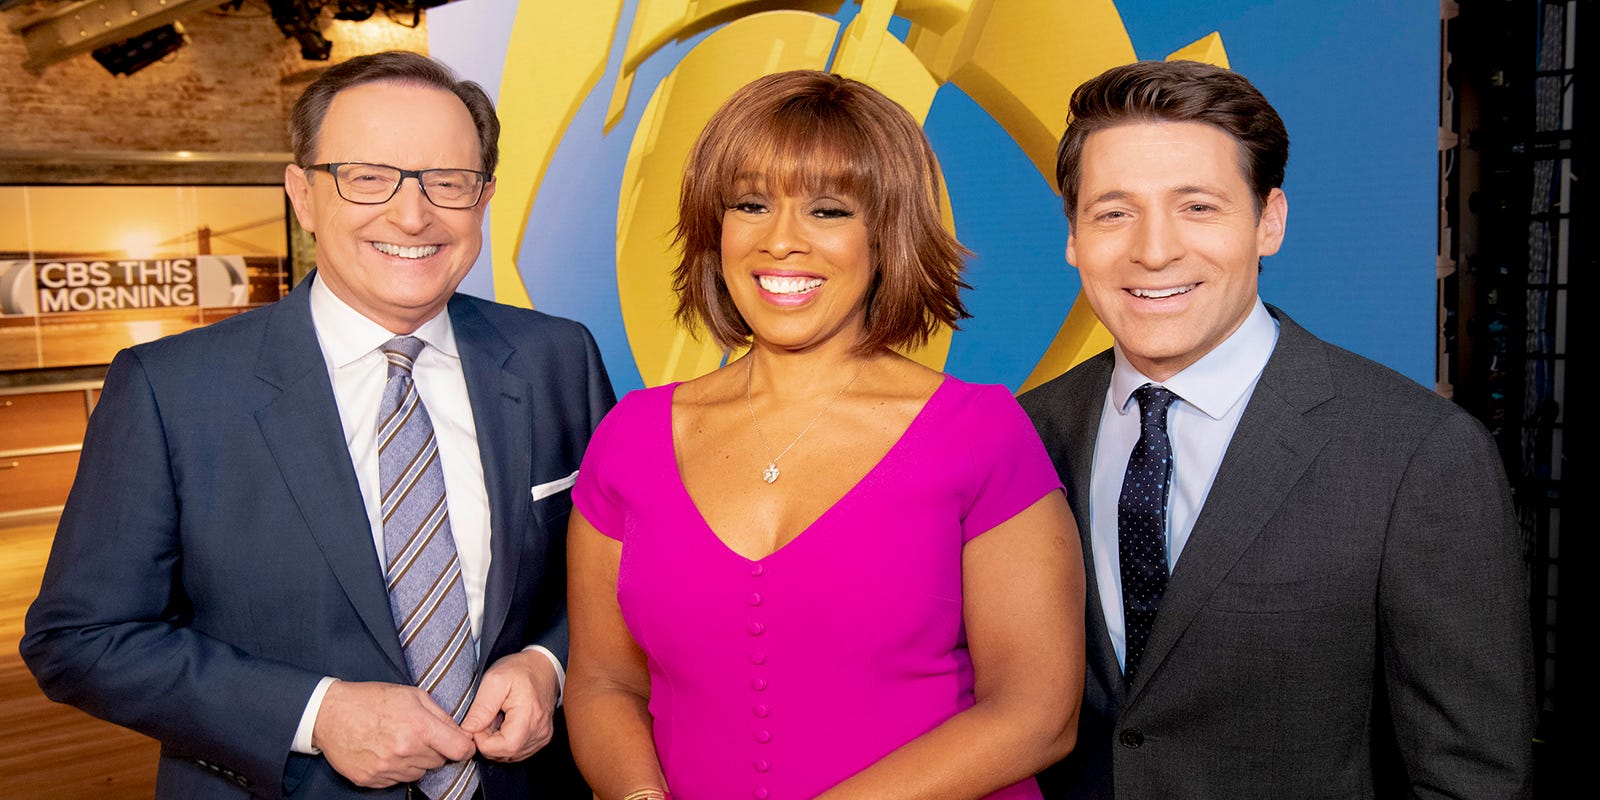 Cbs Keeps Gayle King But Makes Sweeping Anchor Changes Elsewhere